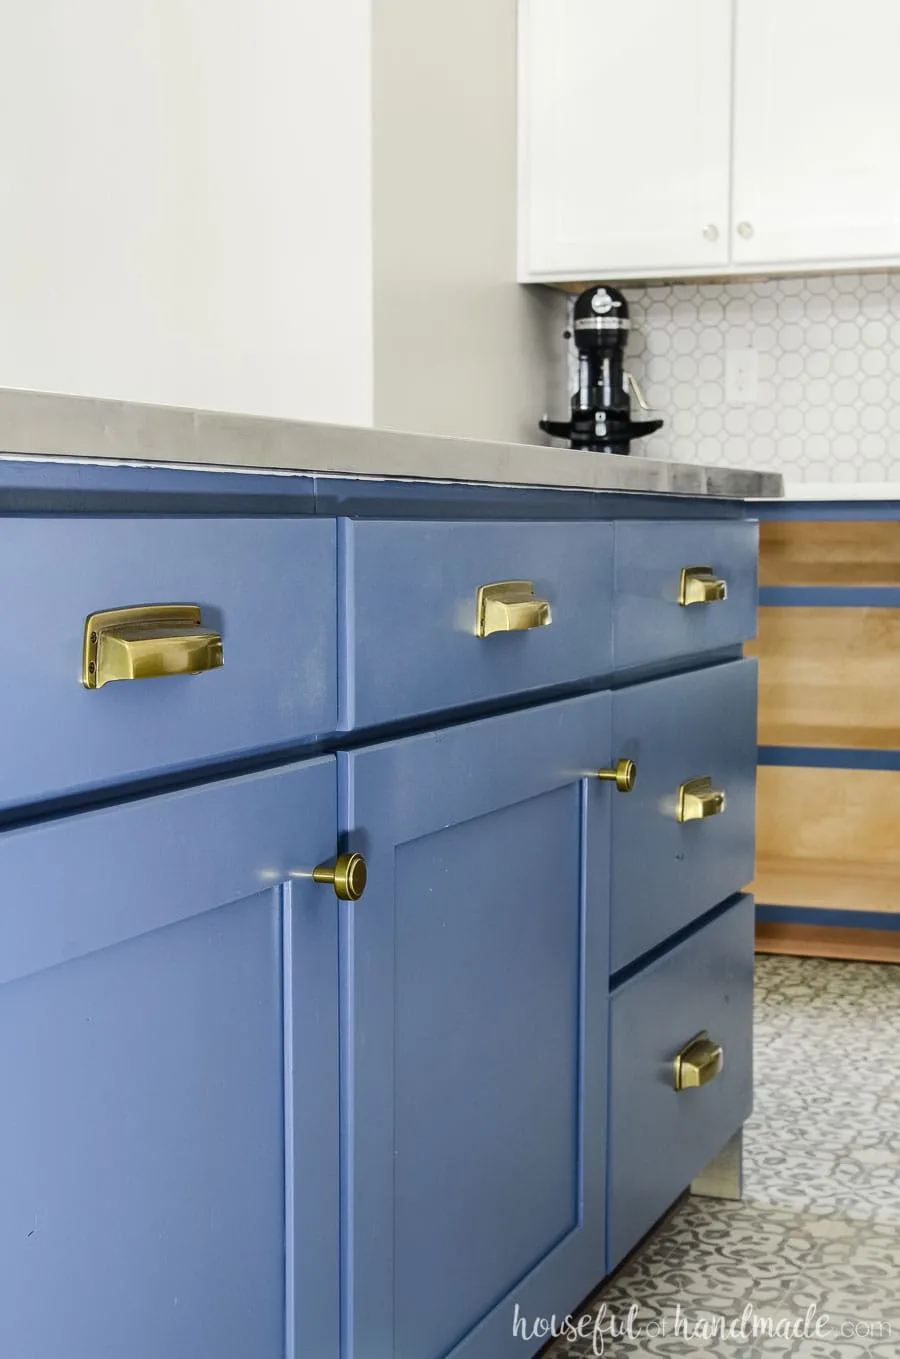 Brass knobs and pulls are perfect on the navy blue base cabinets. See the complete budget farmhouse kitchen remodel at housefulofhandmade.com.